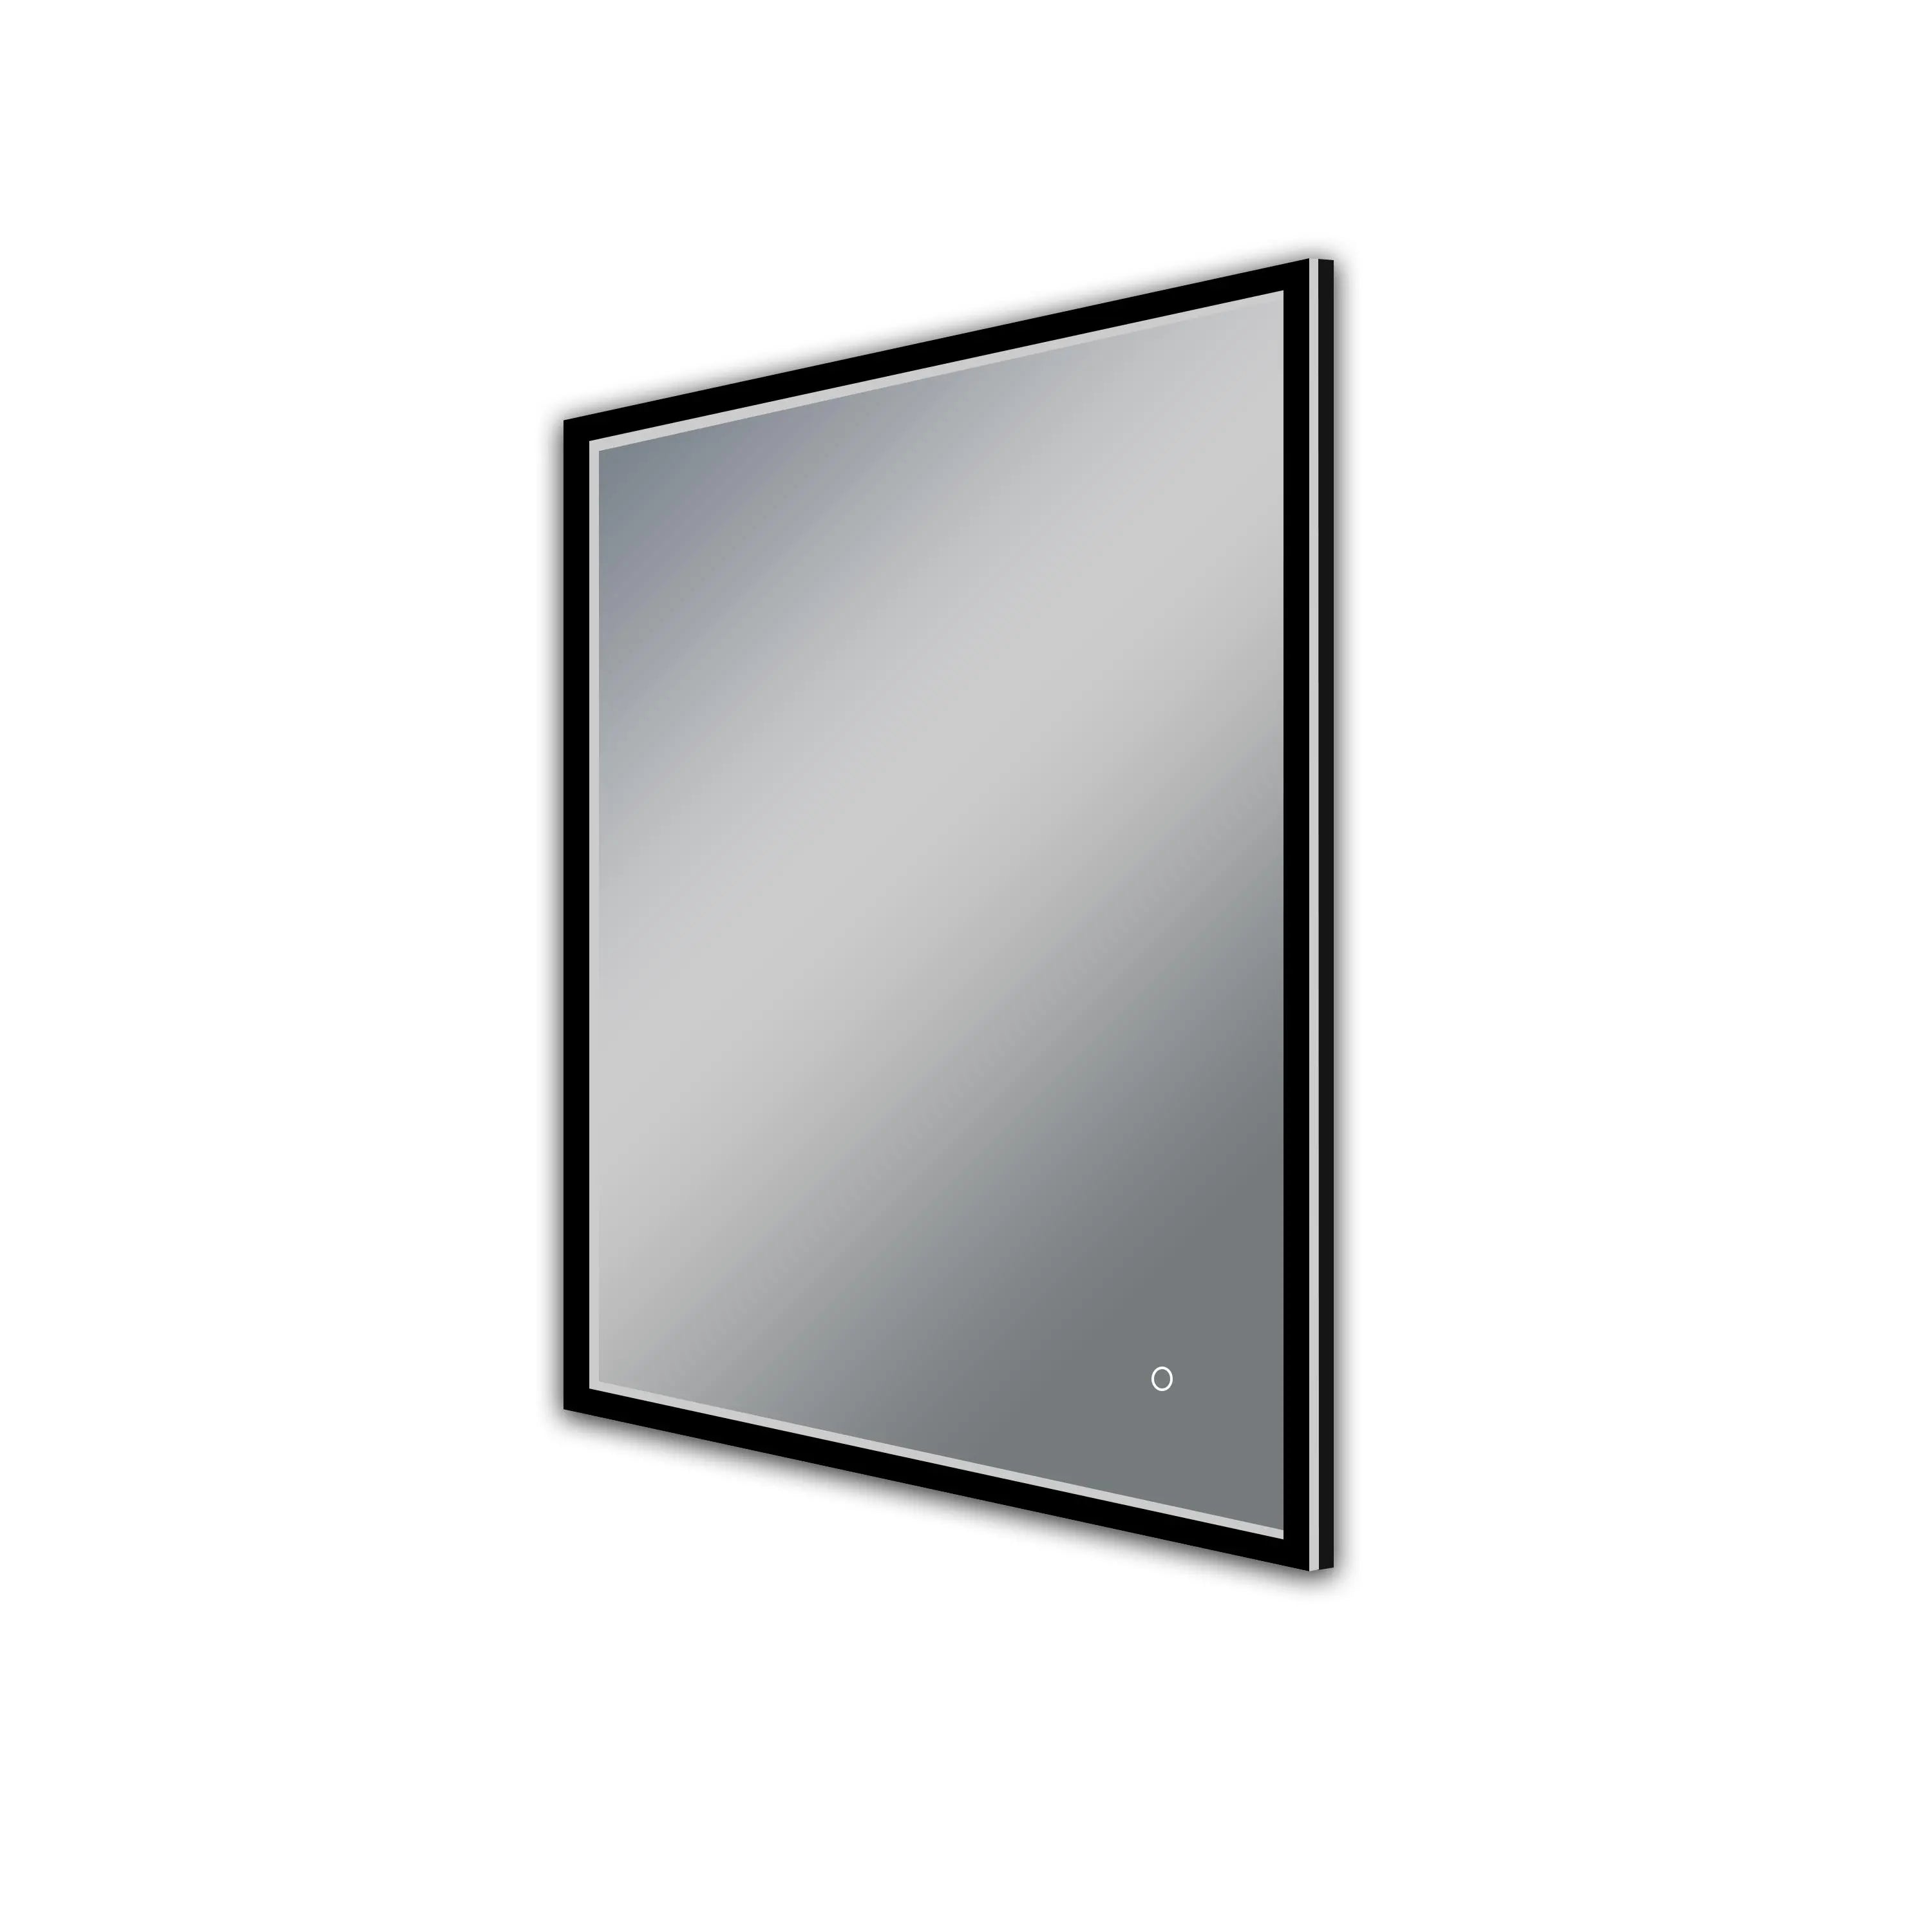 LEO Front & Backlit LED Lighted Mirror with Dimmer & Defogger - Available in 2 Sizes Dreamwerks LED Mirror